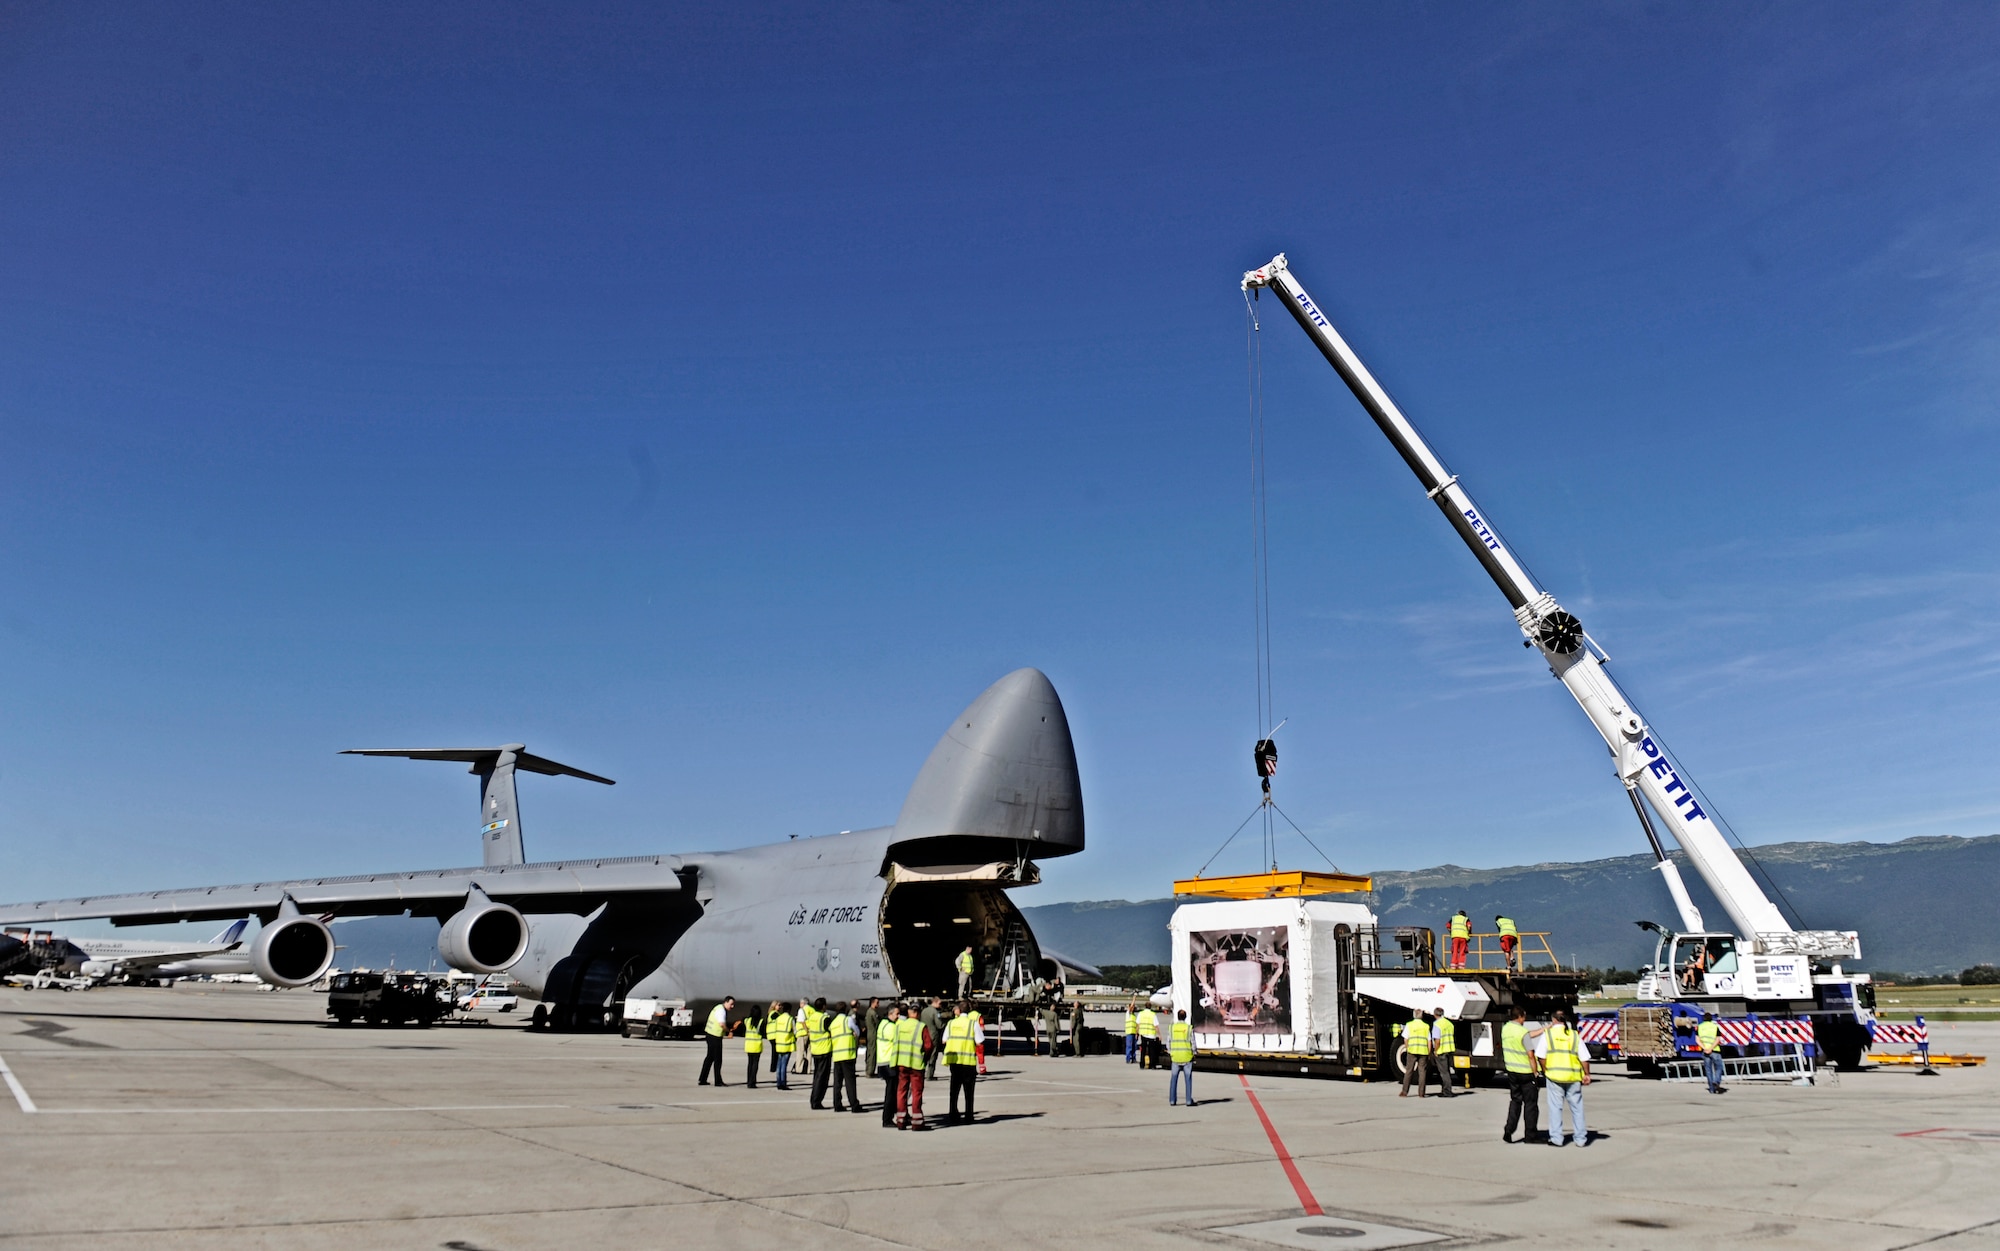 GENEVA, Switzerland -- A C-5M Super Galaxy, based out of Dover AFB, Delaware, is loaded with the Alpha Magnetic Spectrometer at the Geneva, Switzerland airport August 25. The AMS is the brain child of Nobel Laureate, Professor Samuel Ting and has been in production over the last 16 years. The purpose of the experiment is to detect and analyze particles found in space while docked to the International Space Station. According to Prof. Ting, this should help us better understand the universe and how it was created. (U.S. Air Force photo/ Staff Sgt. Ryan Crane)